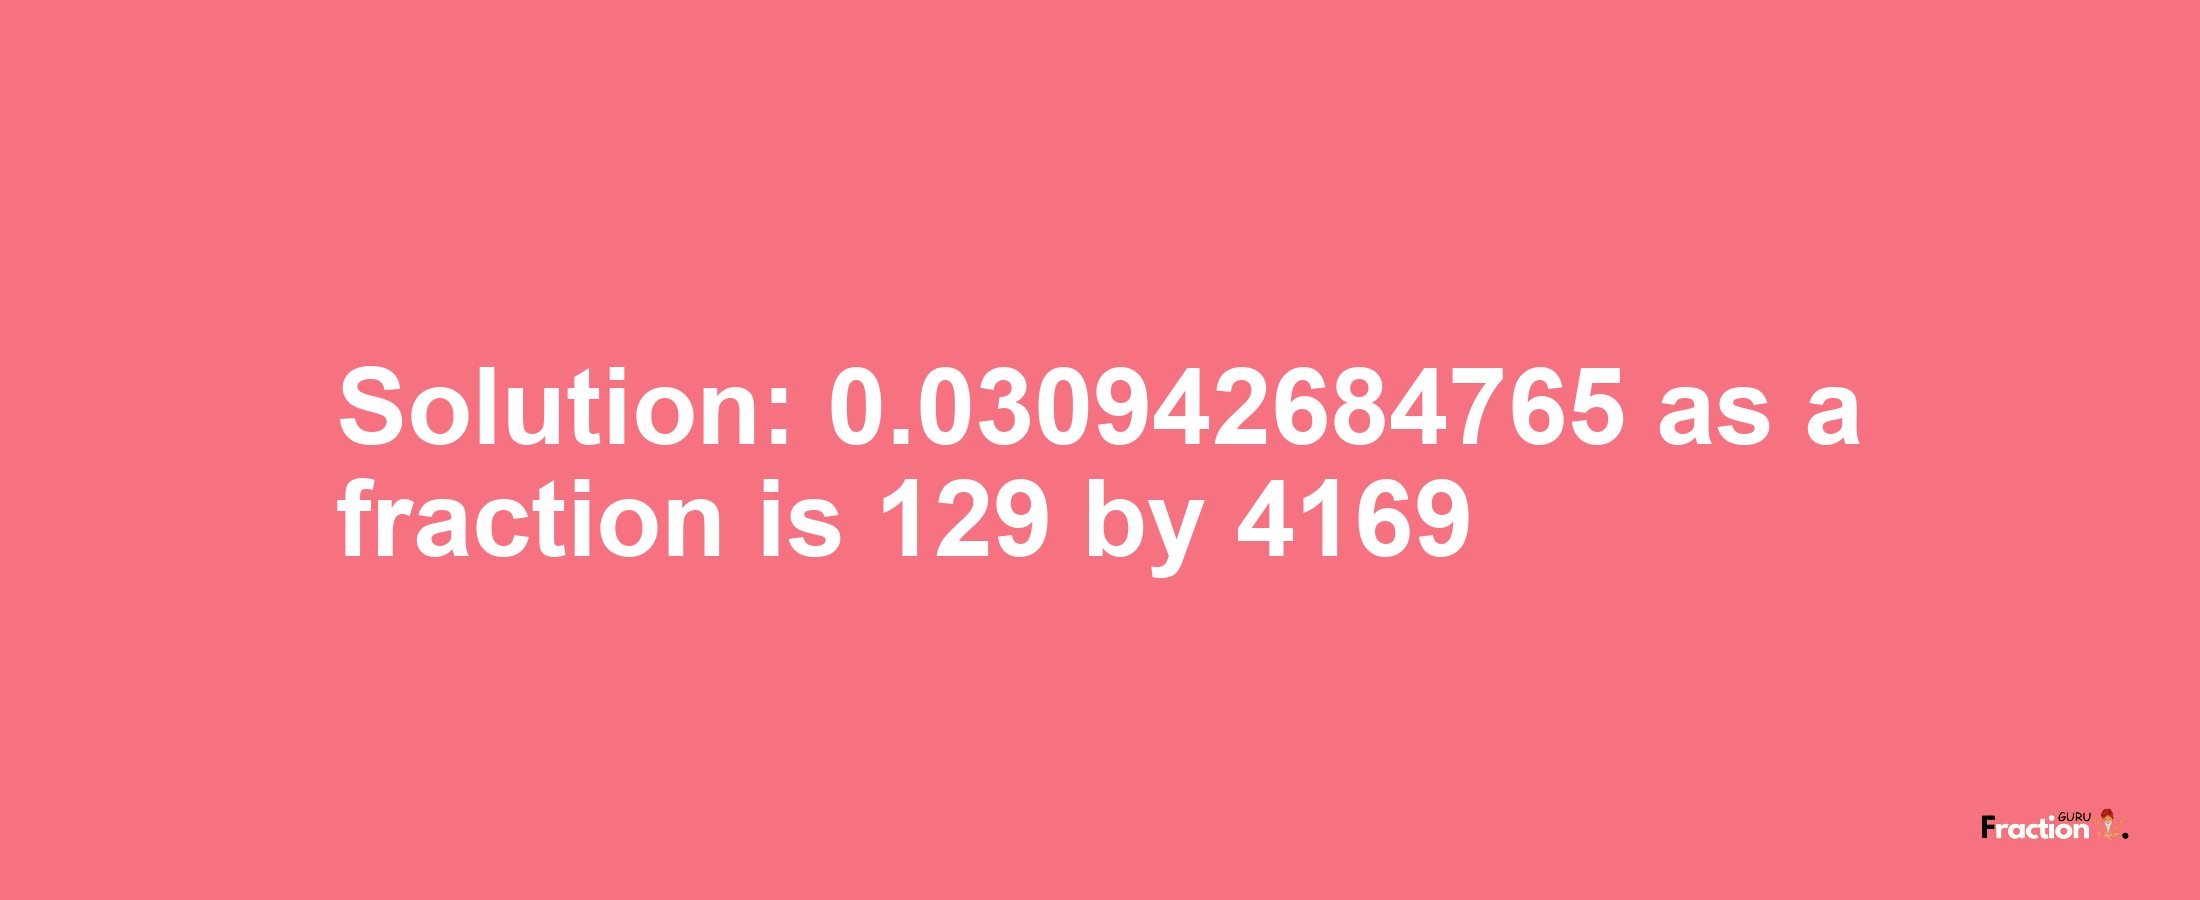 Solution:0.030942684765 as a fraction is 129/4169